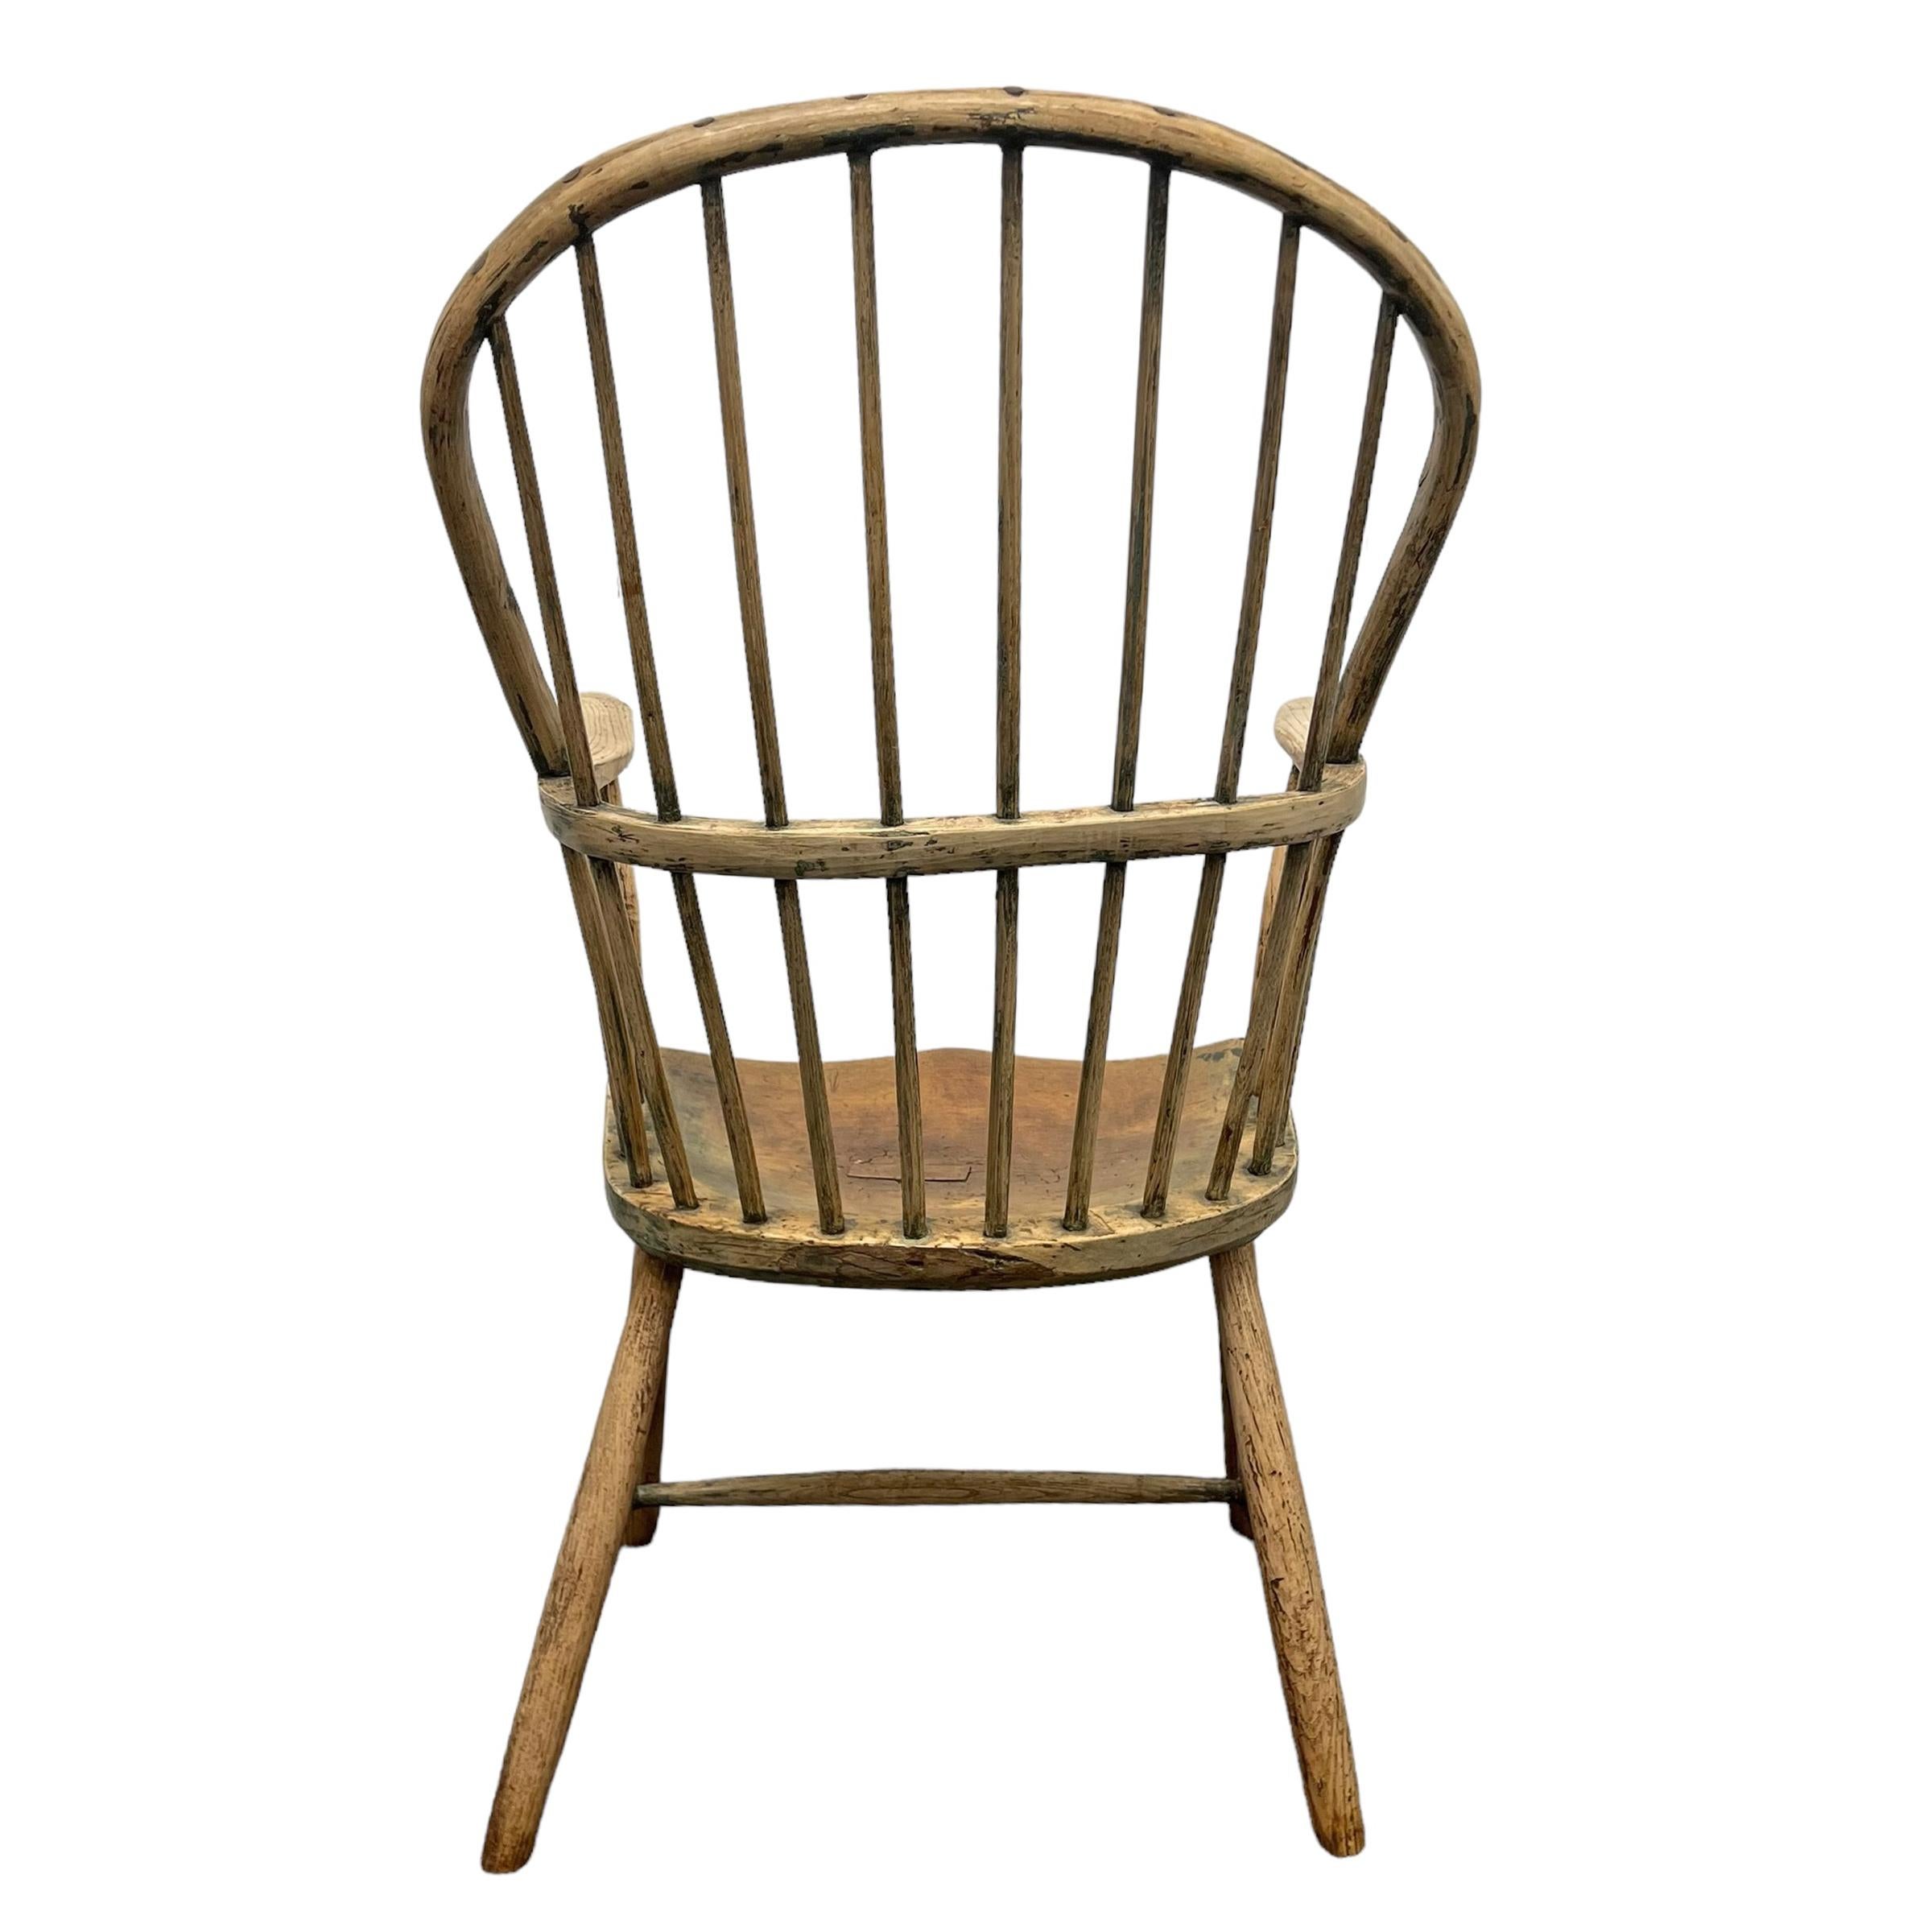 18th Century and Earlier 18th Century English Stickback Windsor Armchair For Sale